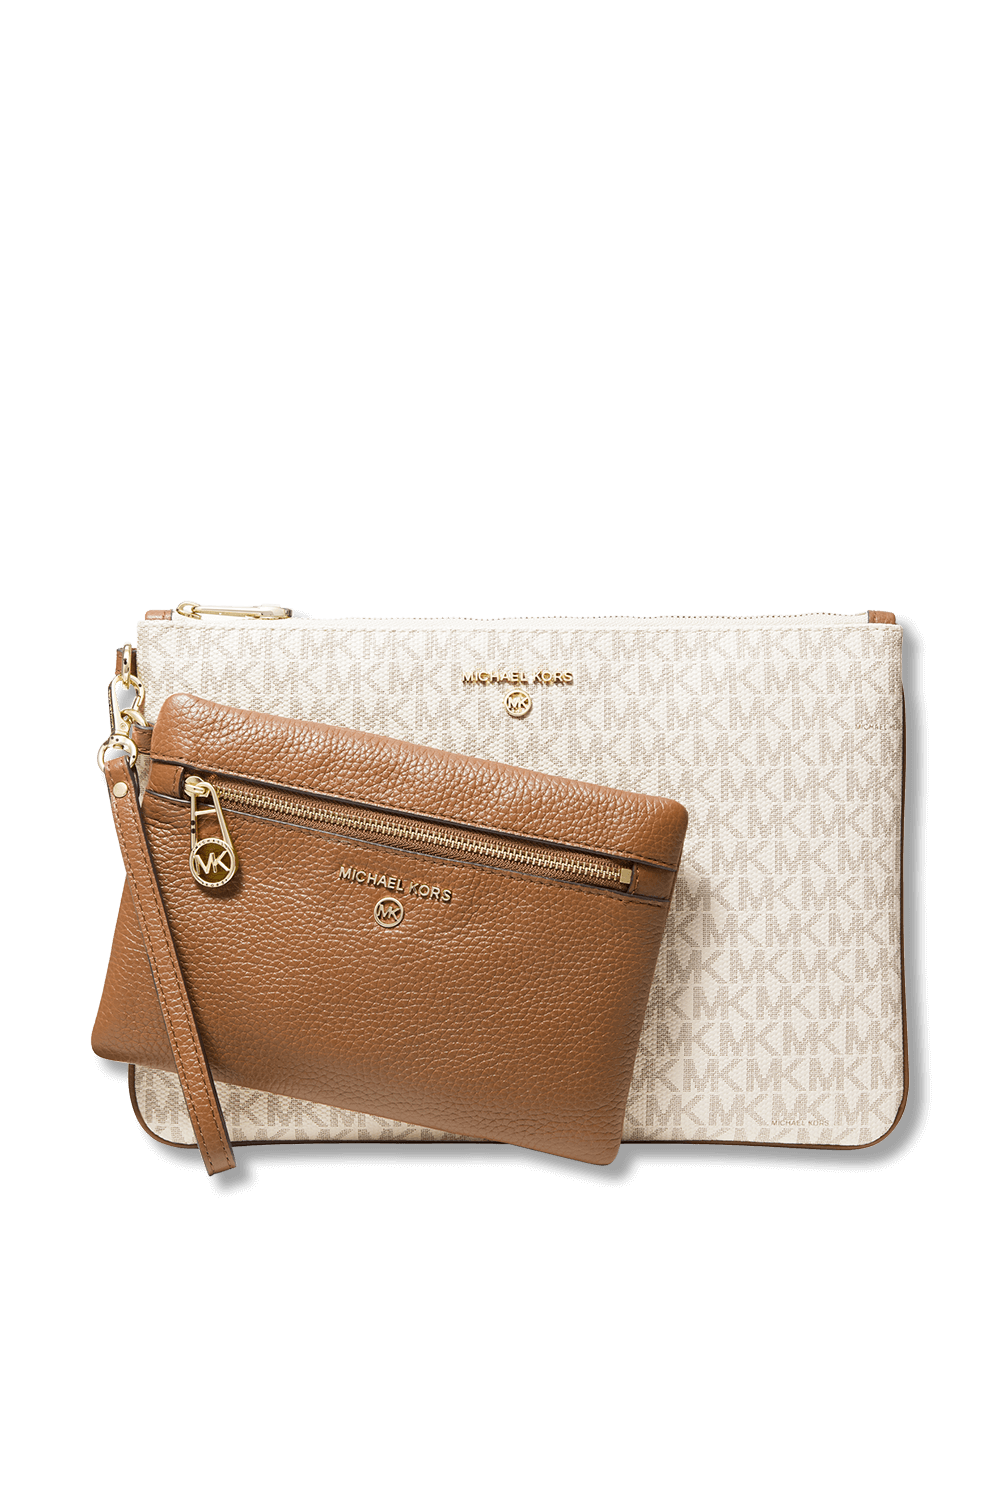 Slater Large Logo White and Leather 2-in-1 Wristlet MICHAEL KORS